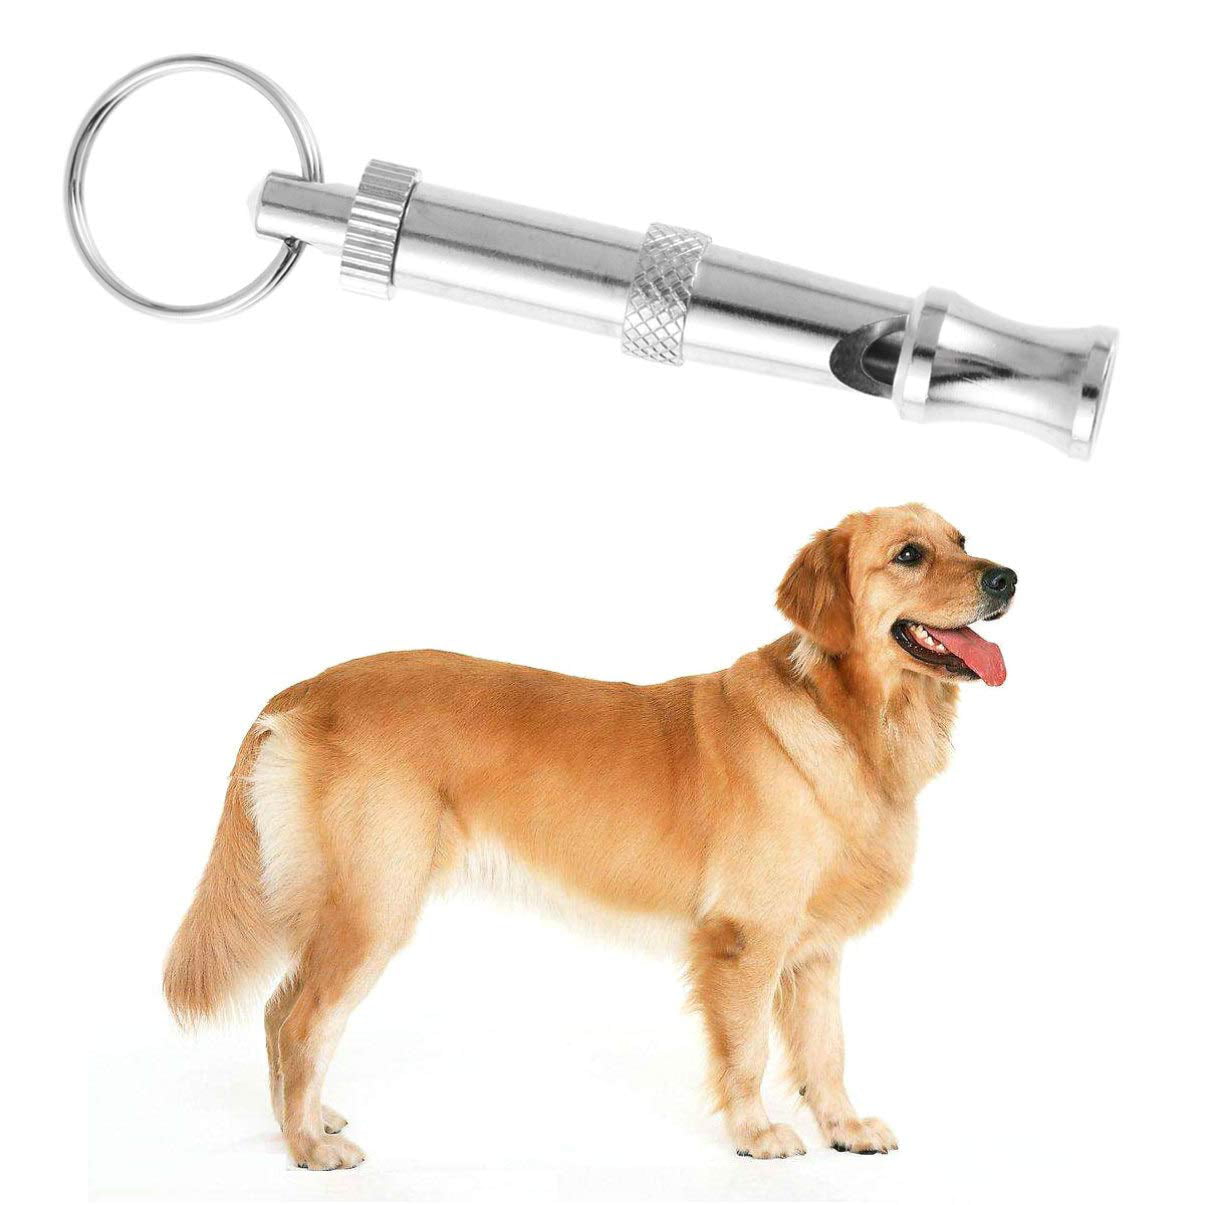 Simply Gorgeous Metal High Frequency Whistle Whistles Dog Puppy Training Pet Keyring 